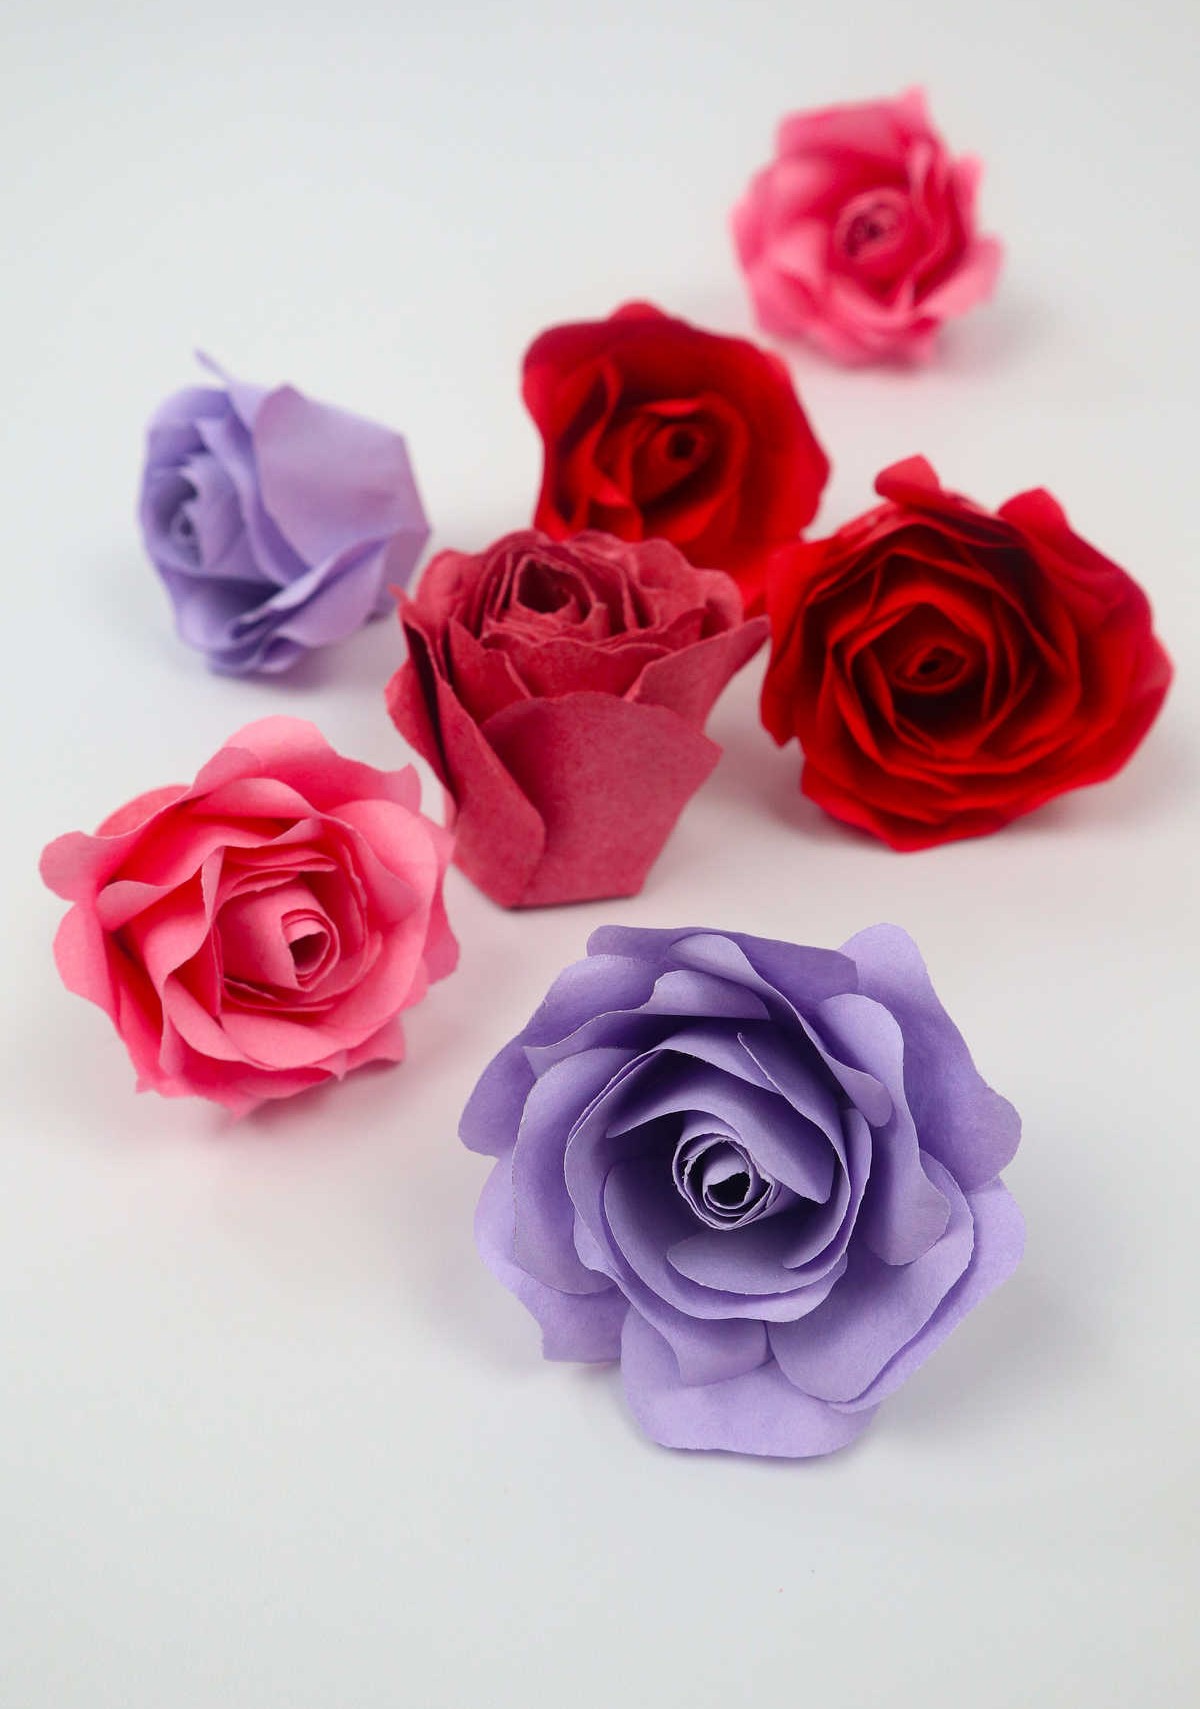 How to Make Paper Roses (Step-by-Step)